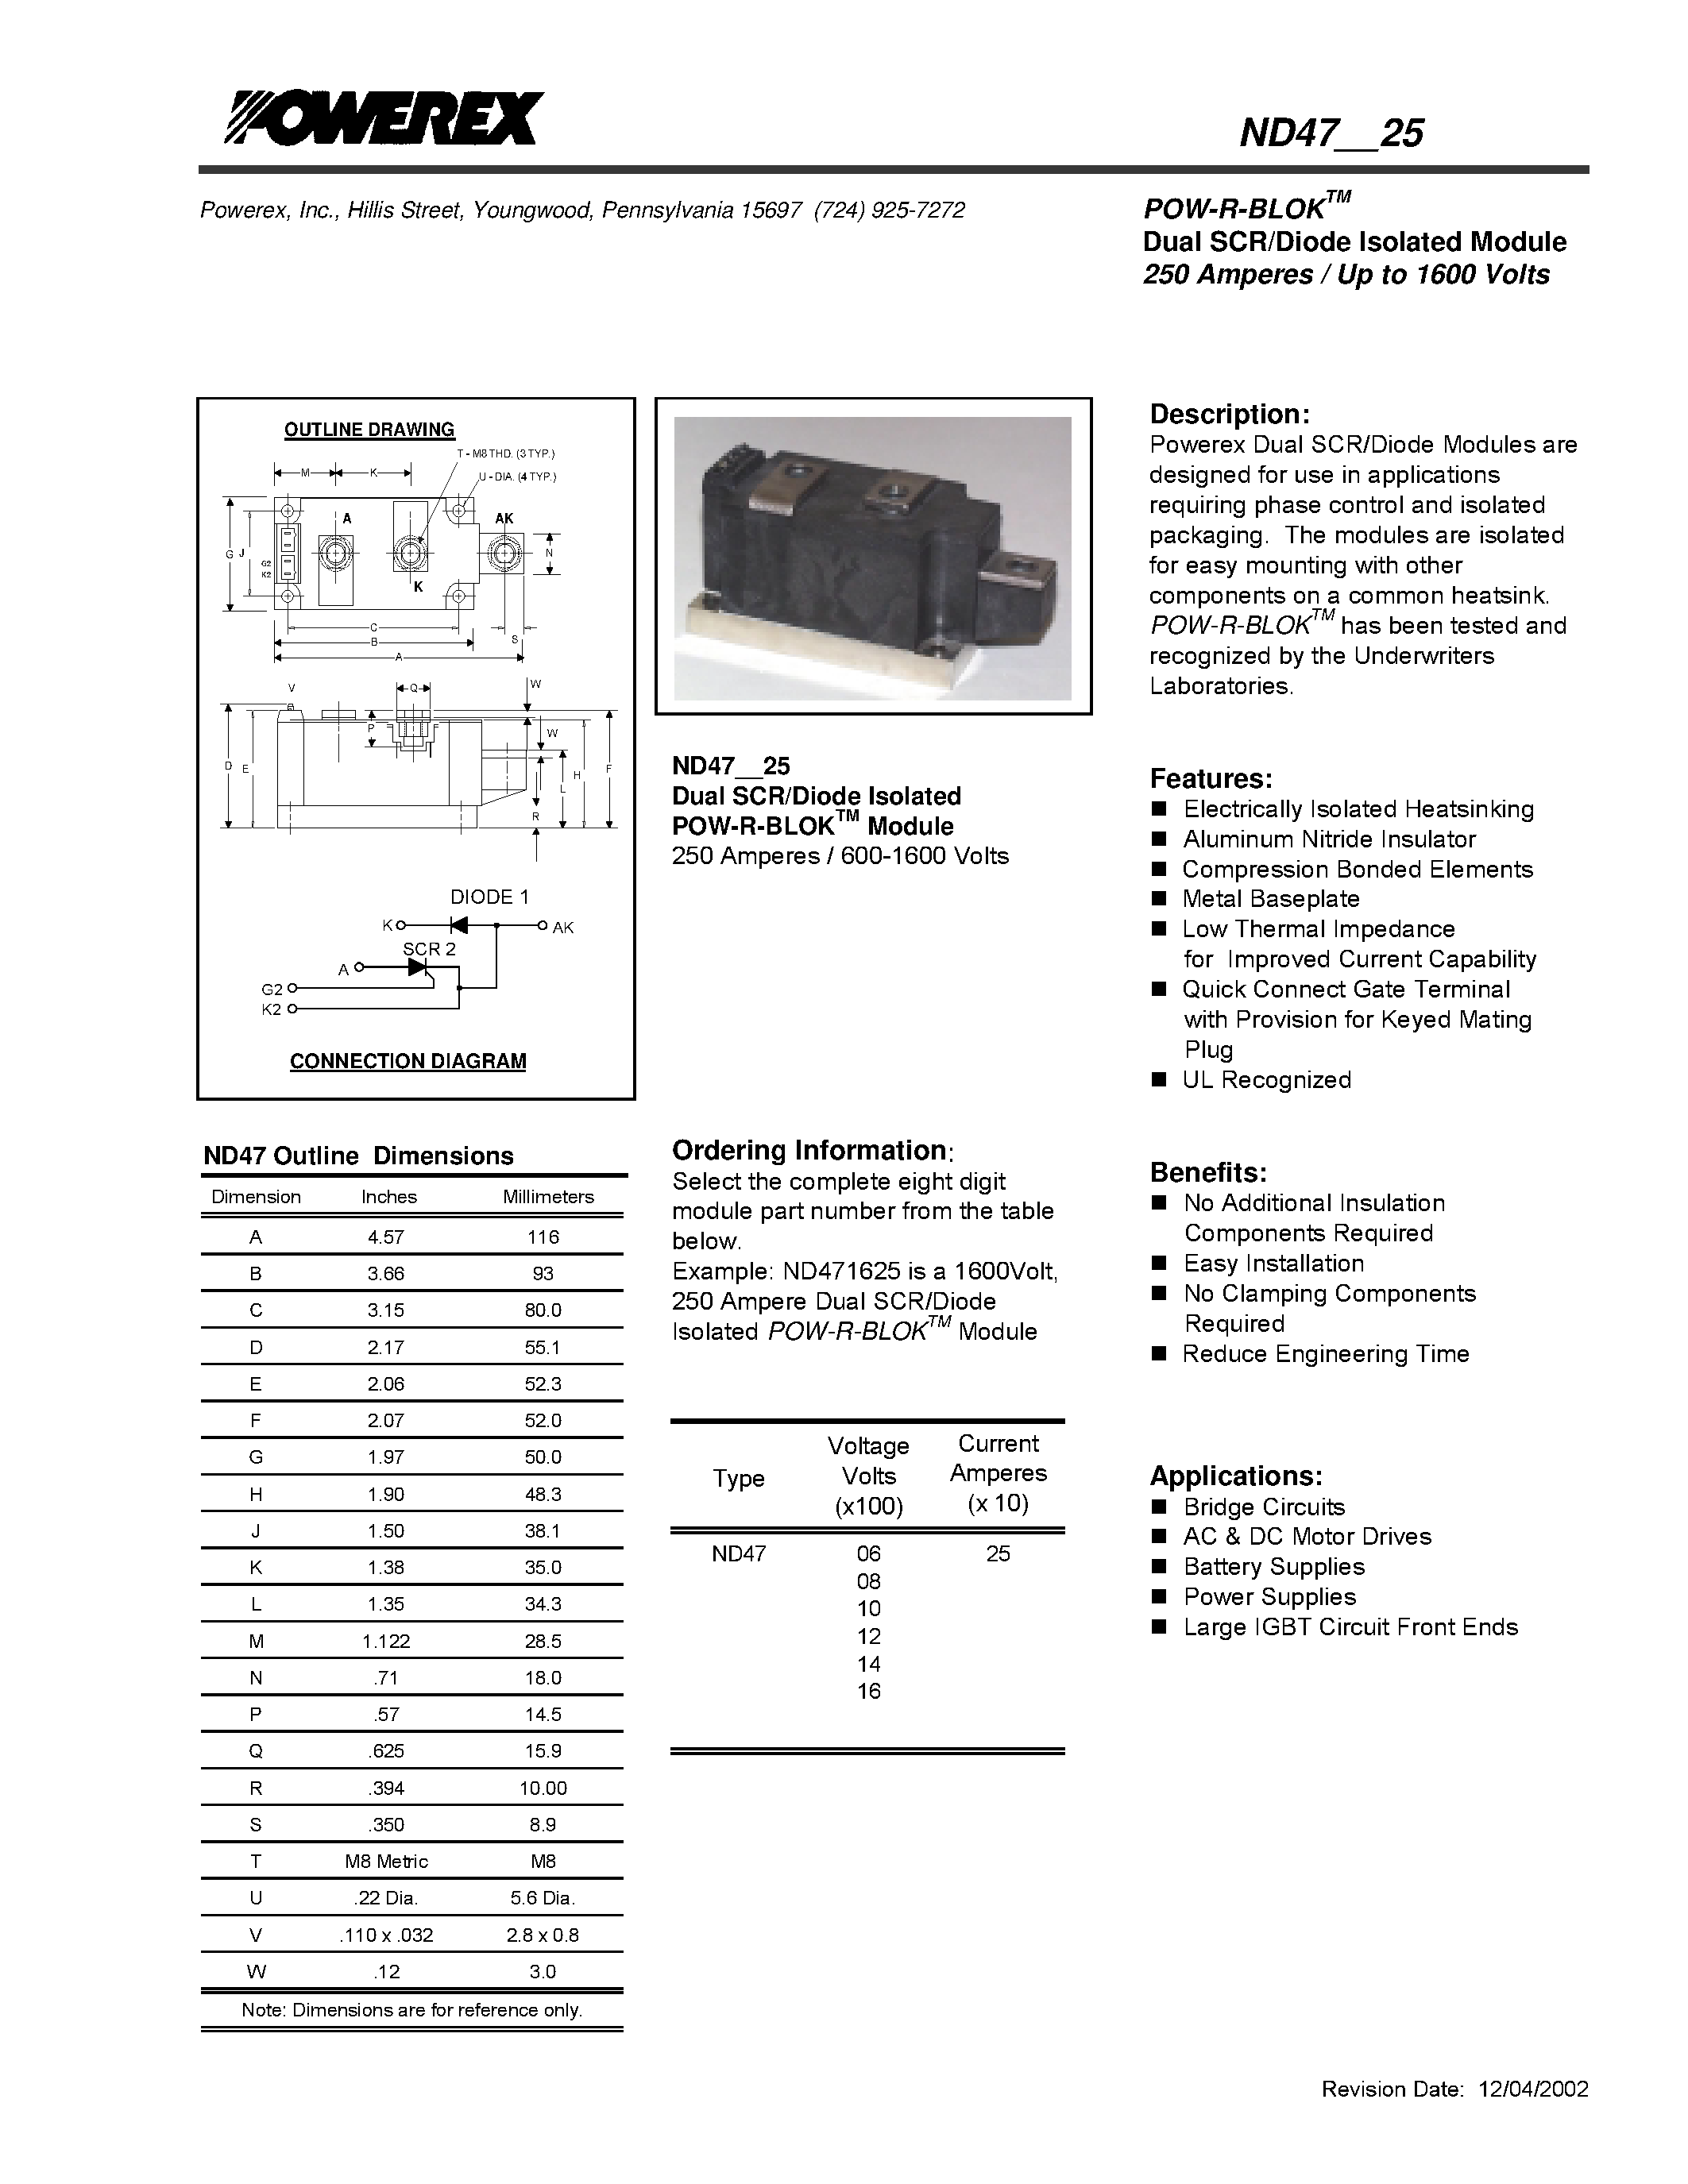 Datasheet ND471025 - POW-R-BLOK Dual SCR/Diode Isolated Module (250 Amperes / Up to 1600 Volts) page 1